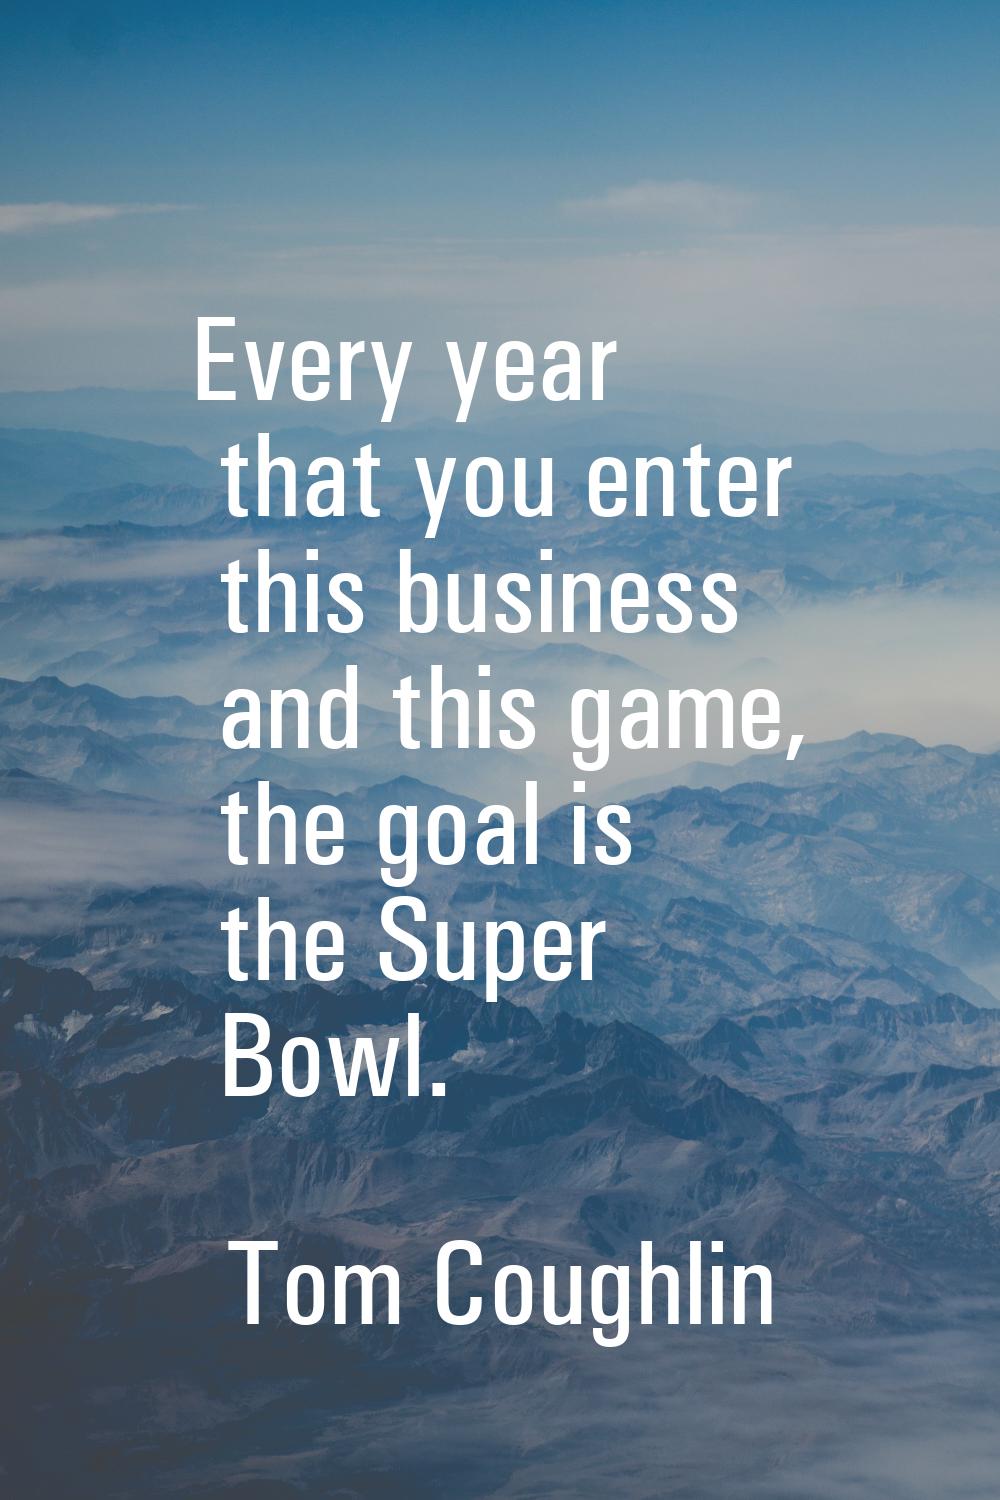 Every year that you enter this business and this game, the goal is the Super Bowl.